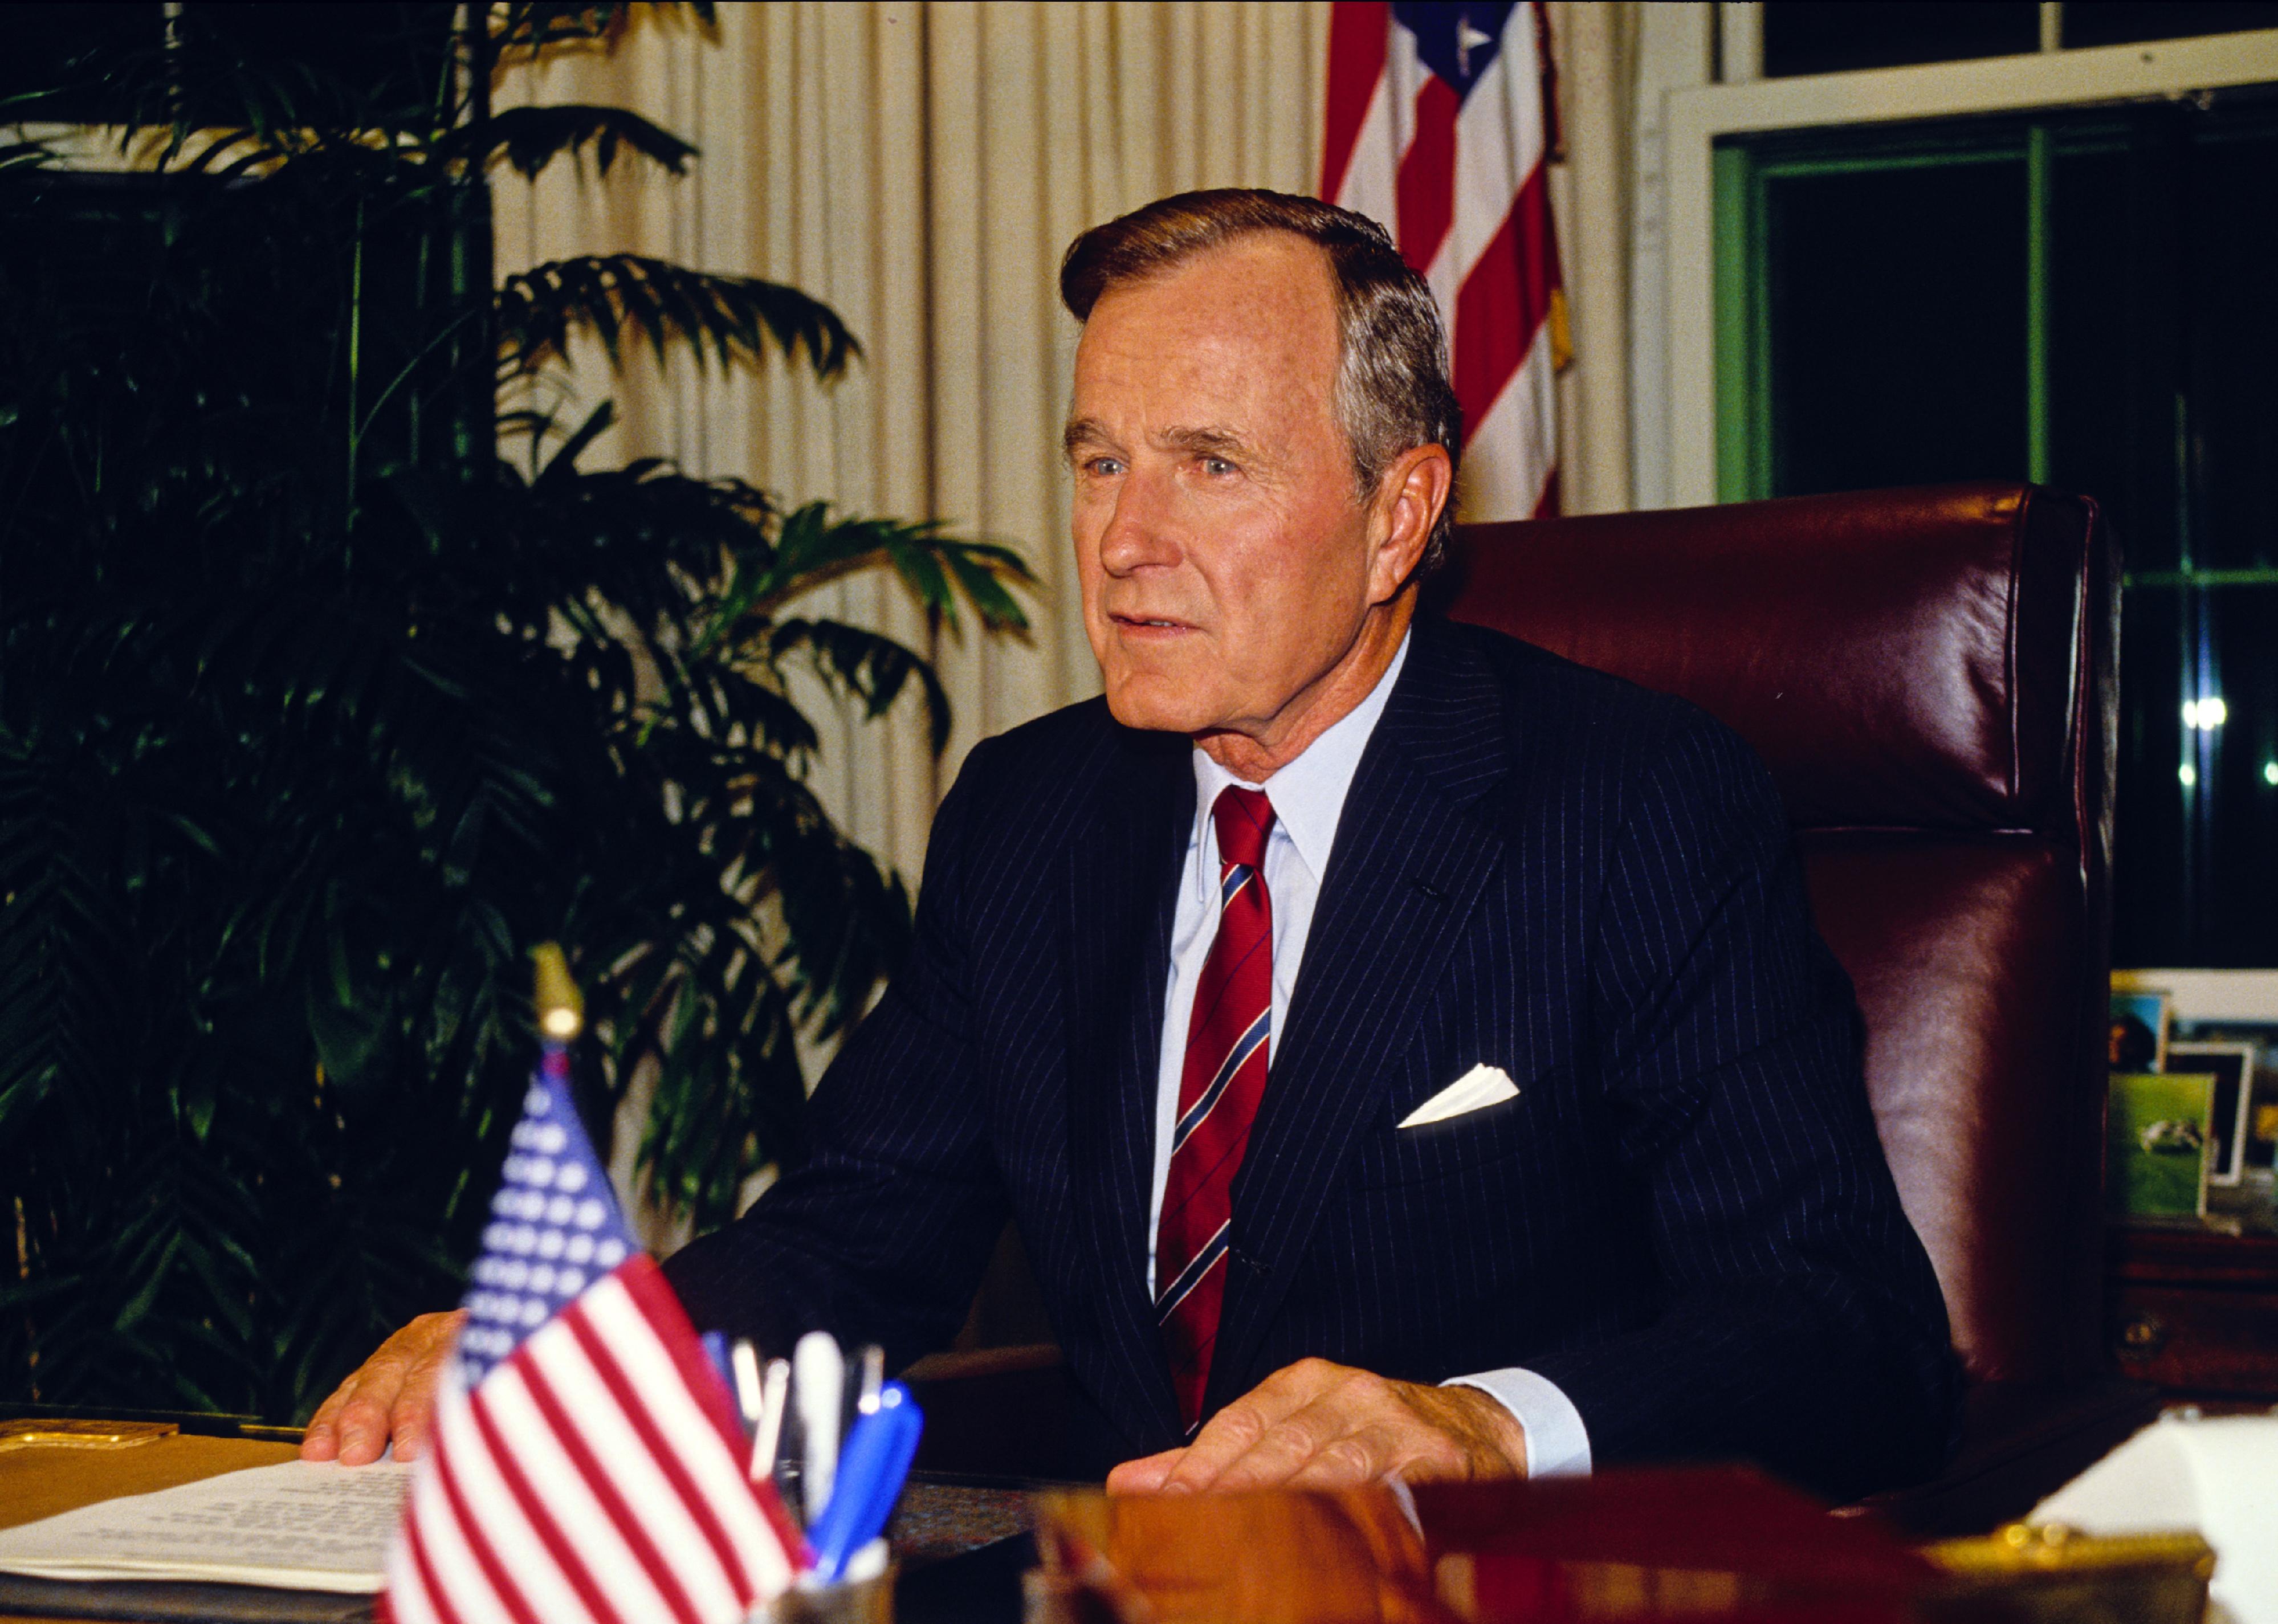 George Bush behind the desk in the Oval Office at the White House.